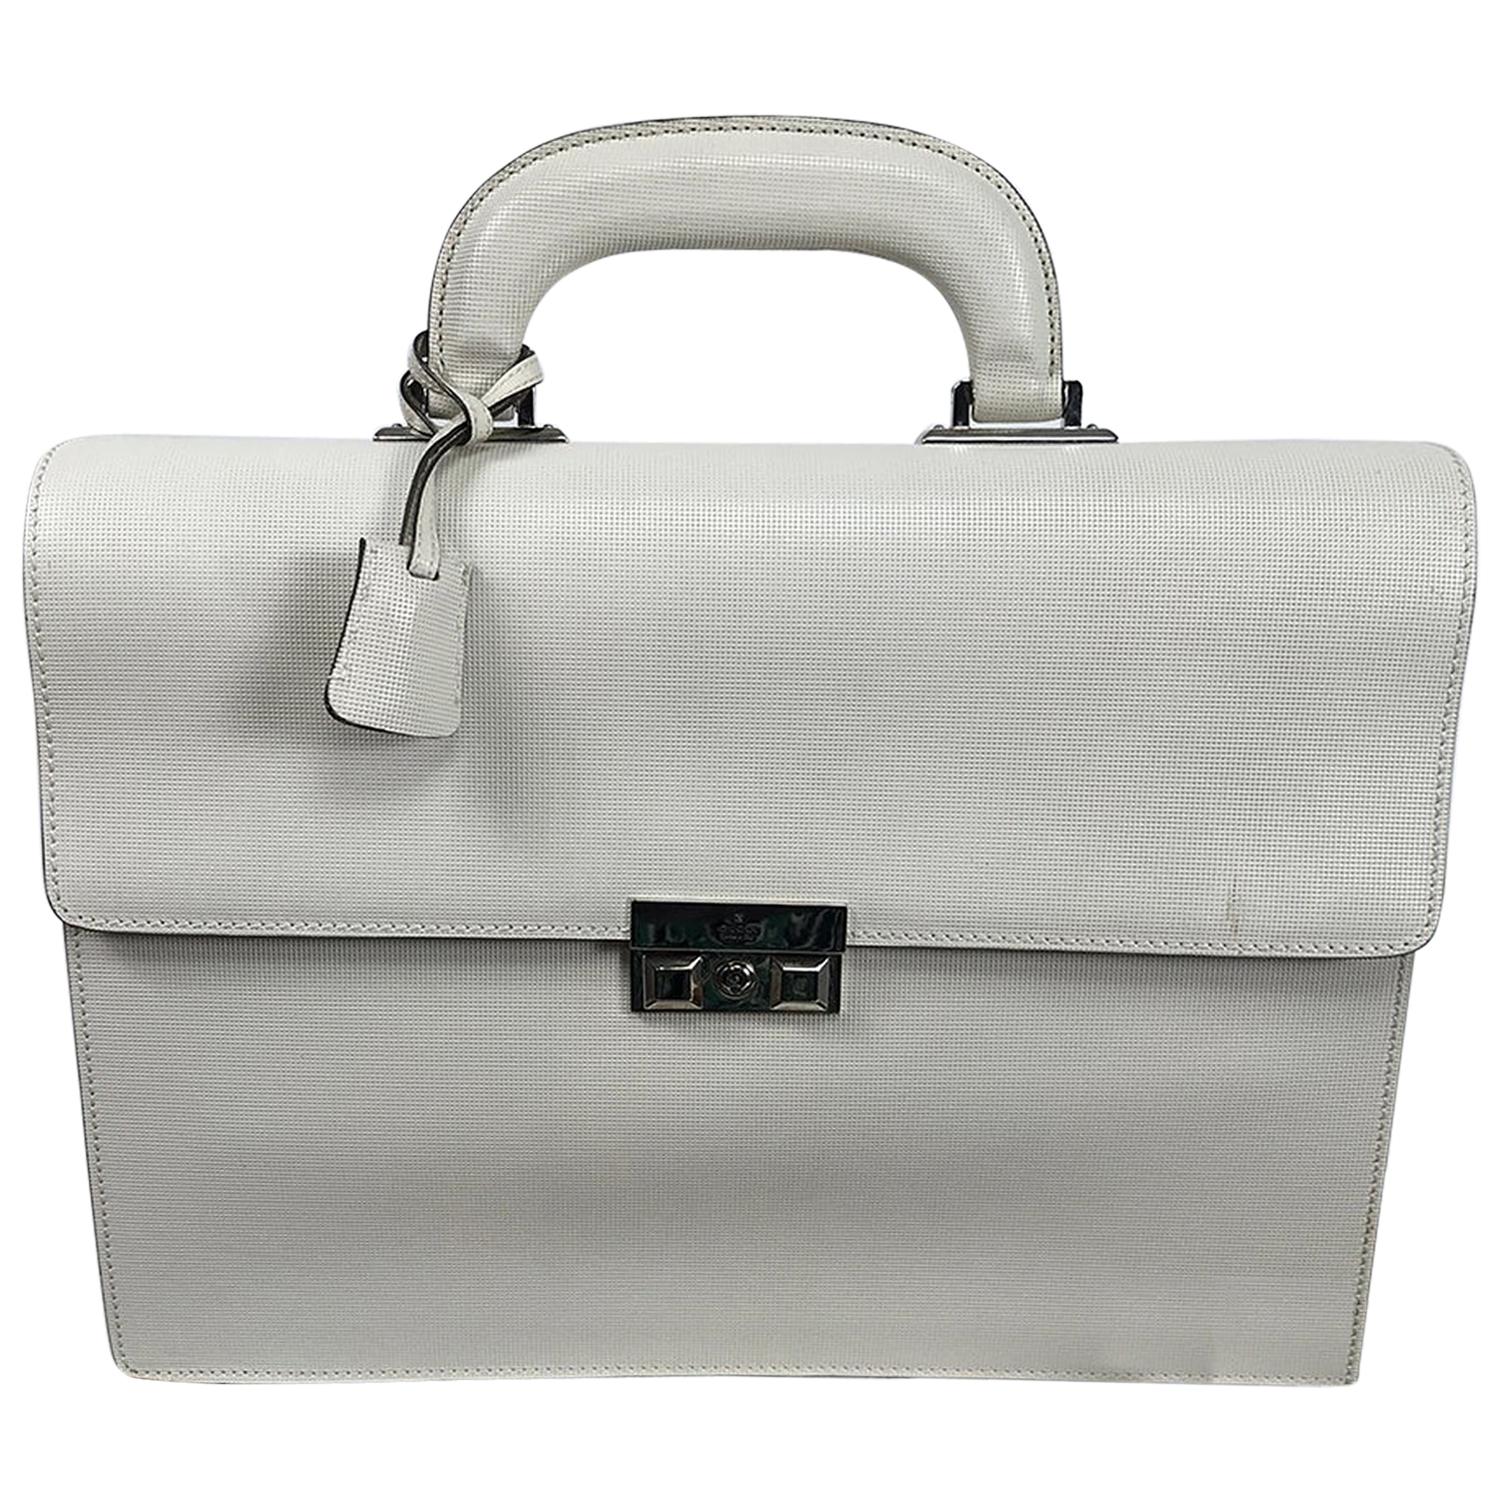 Gucci Cream Textured Leather Black Trim Briefcase with Silver Metal Hardware